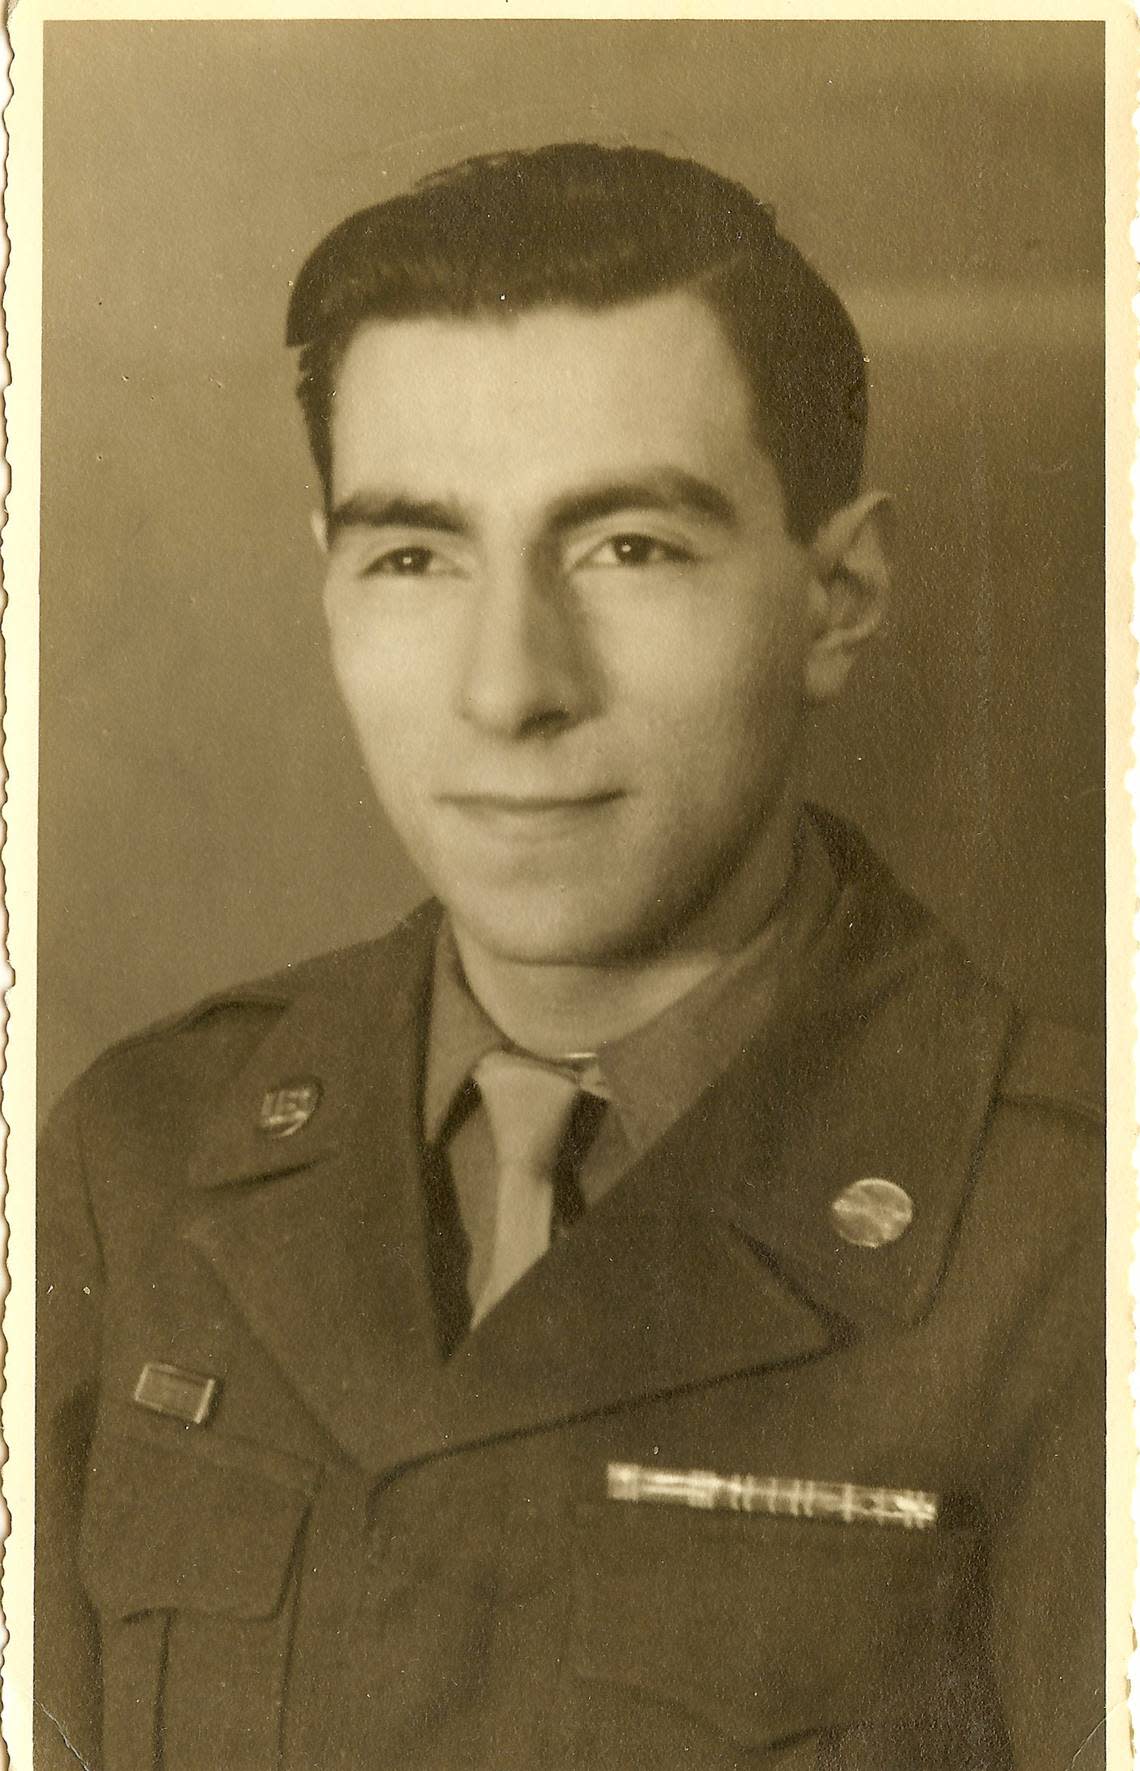 Cpl. Jerry Murad, 1944. He served as a half-track driver during the final year of World War II.